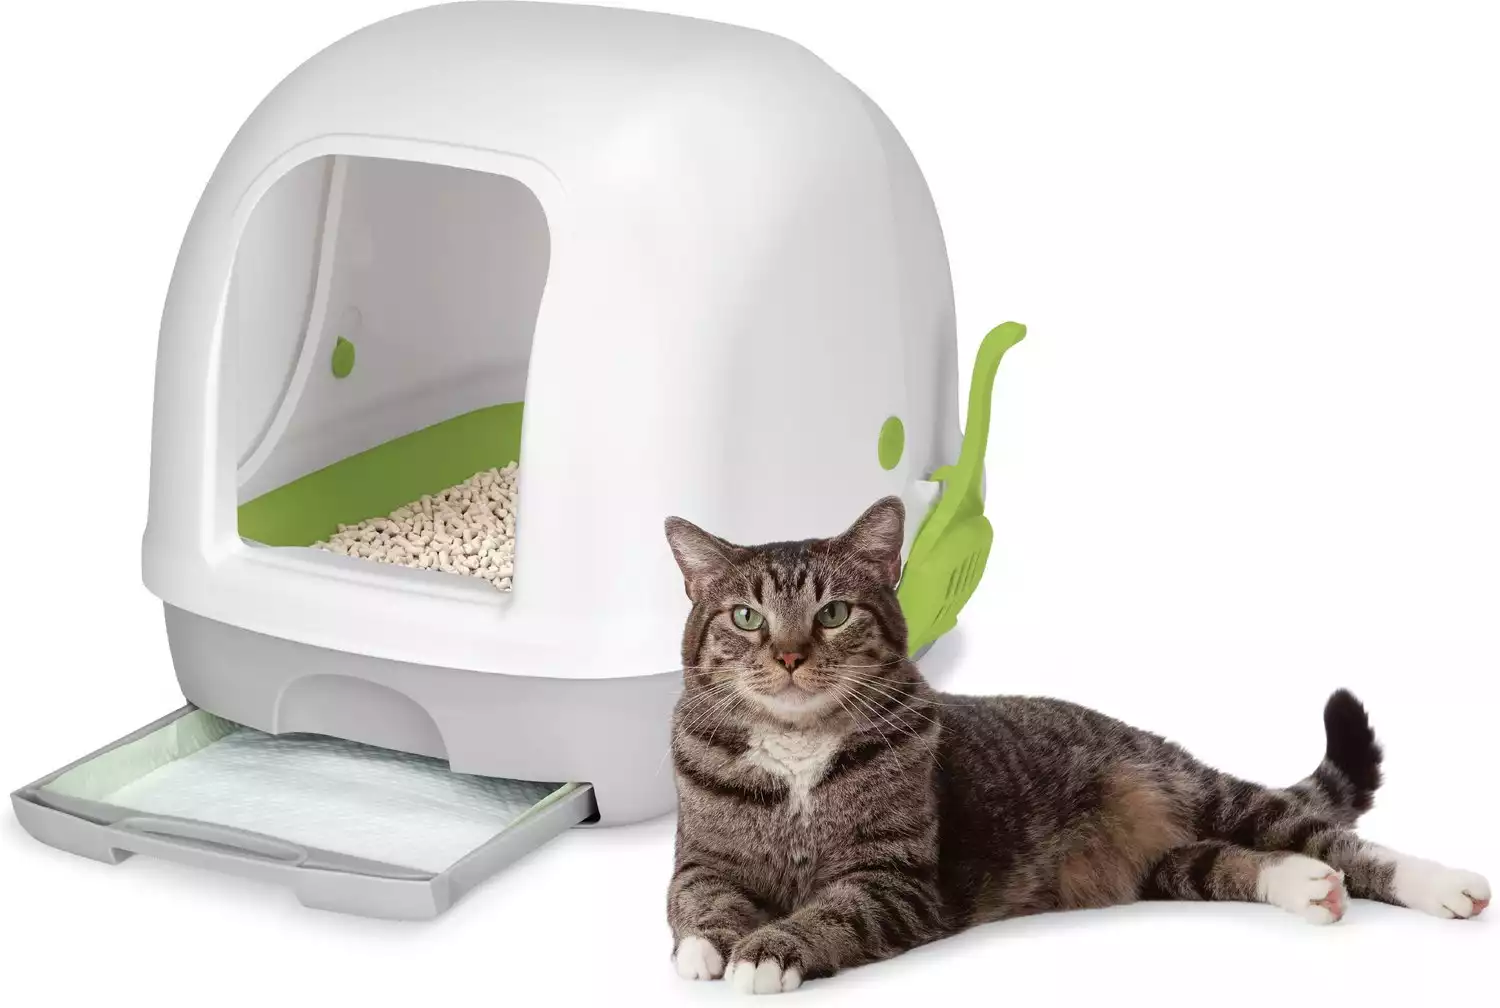 Purina Tidy Cats Breeze Hooded Cat Litter Box System